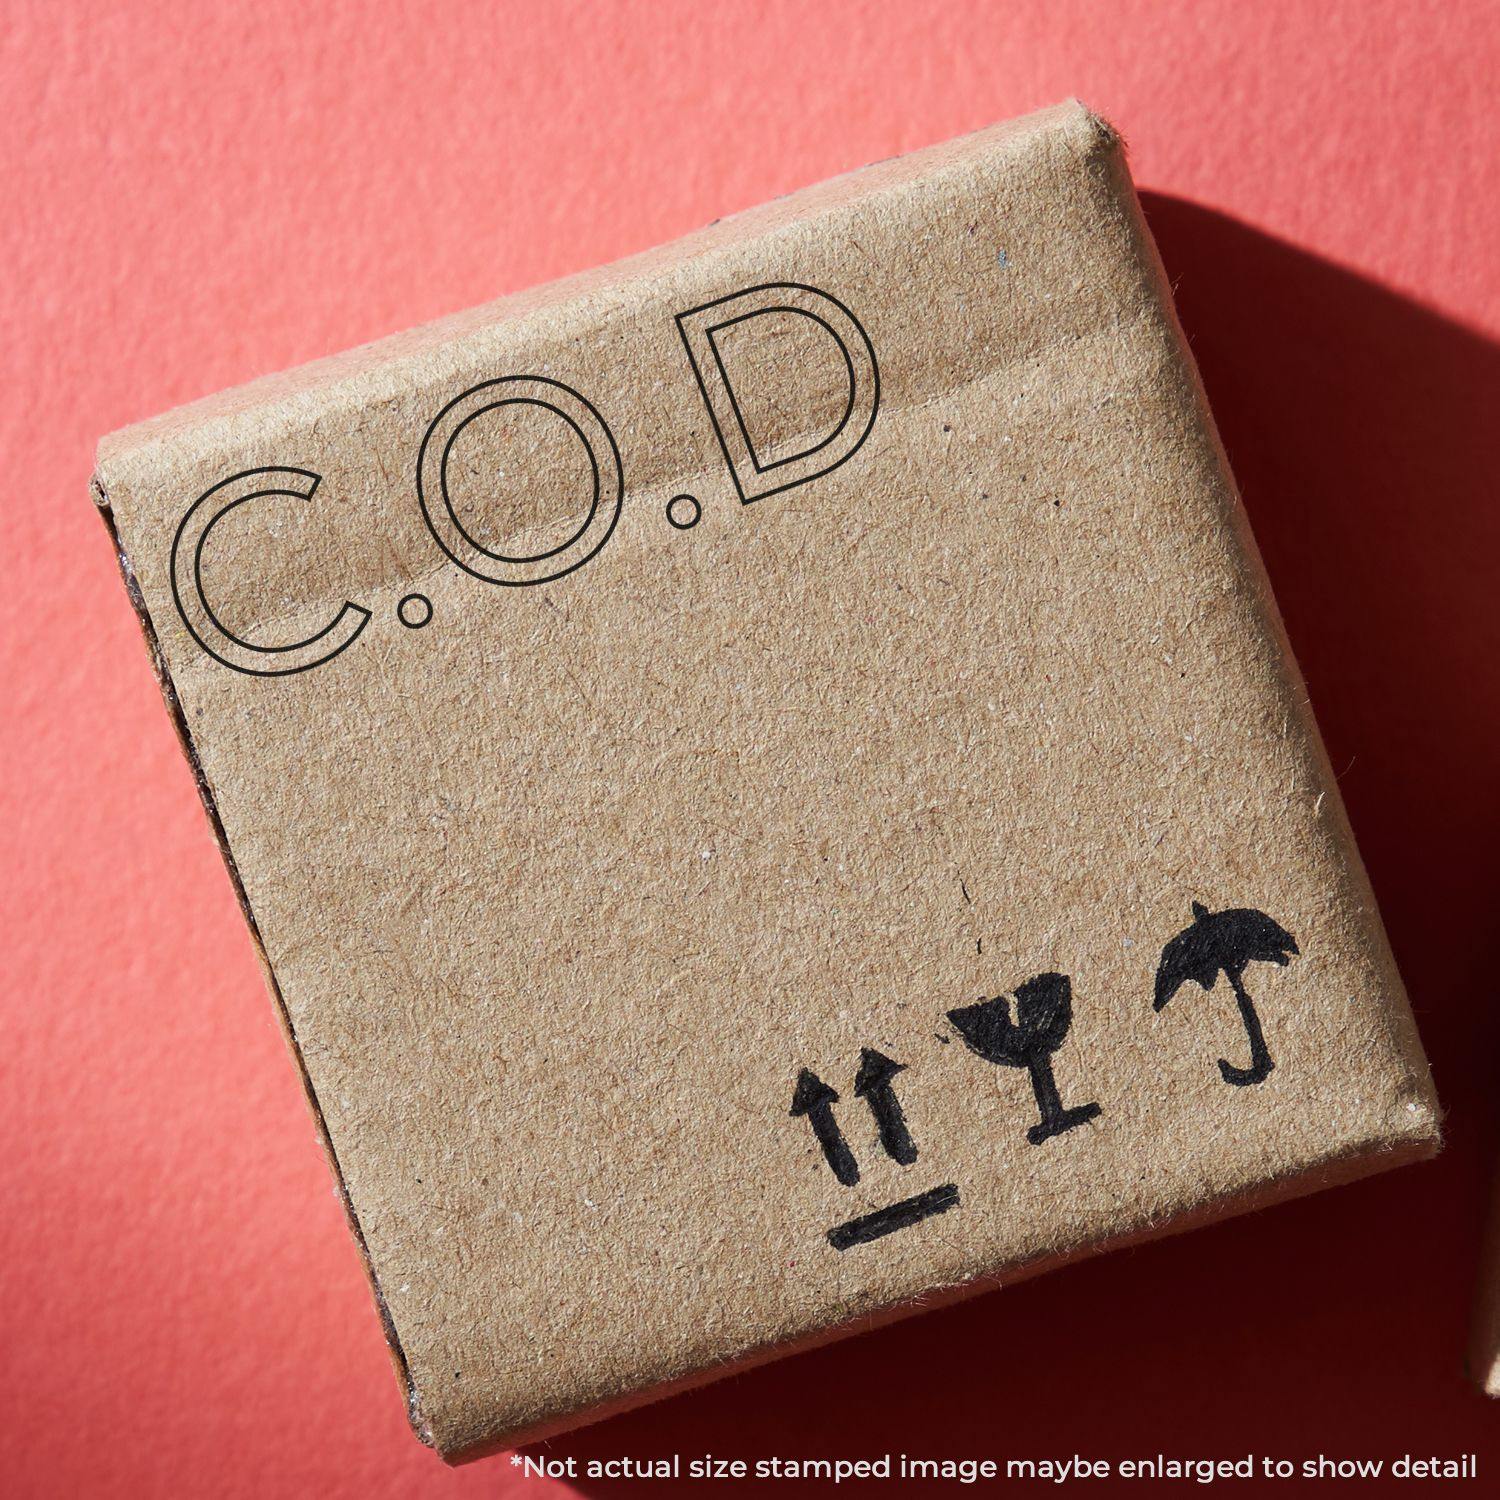 A stock office pre-inked stamp with a stamped image showing how the text "C.O.D" in an outline style is displayed after stamping.